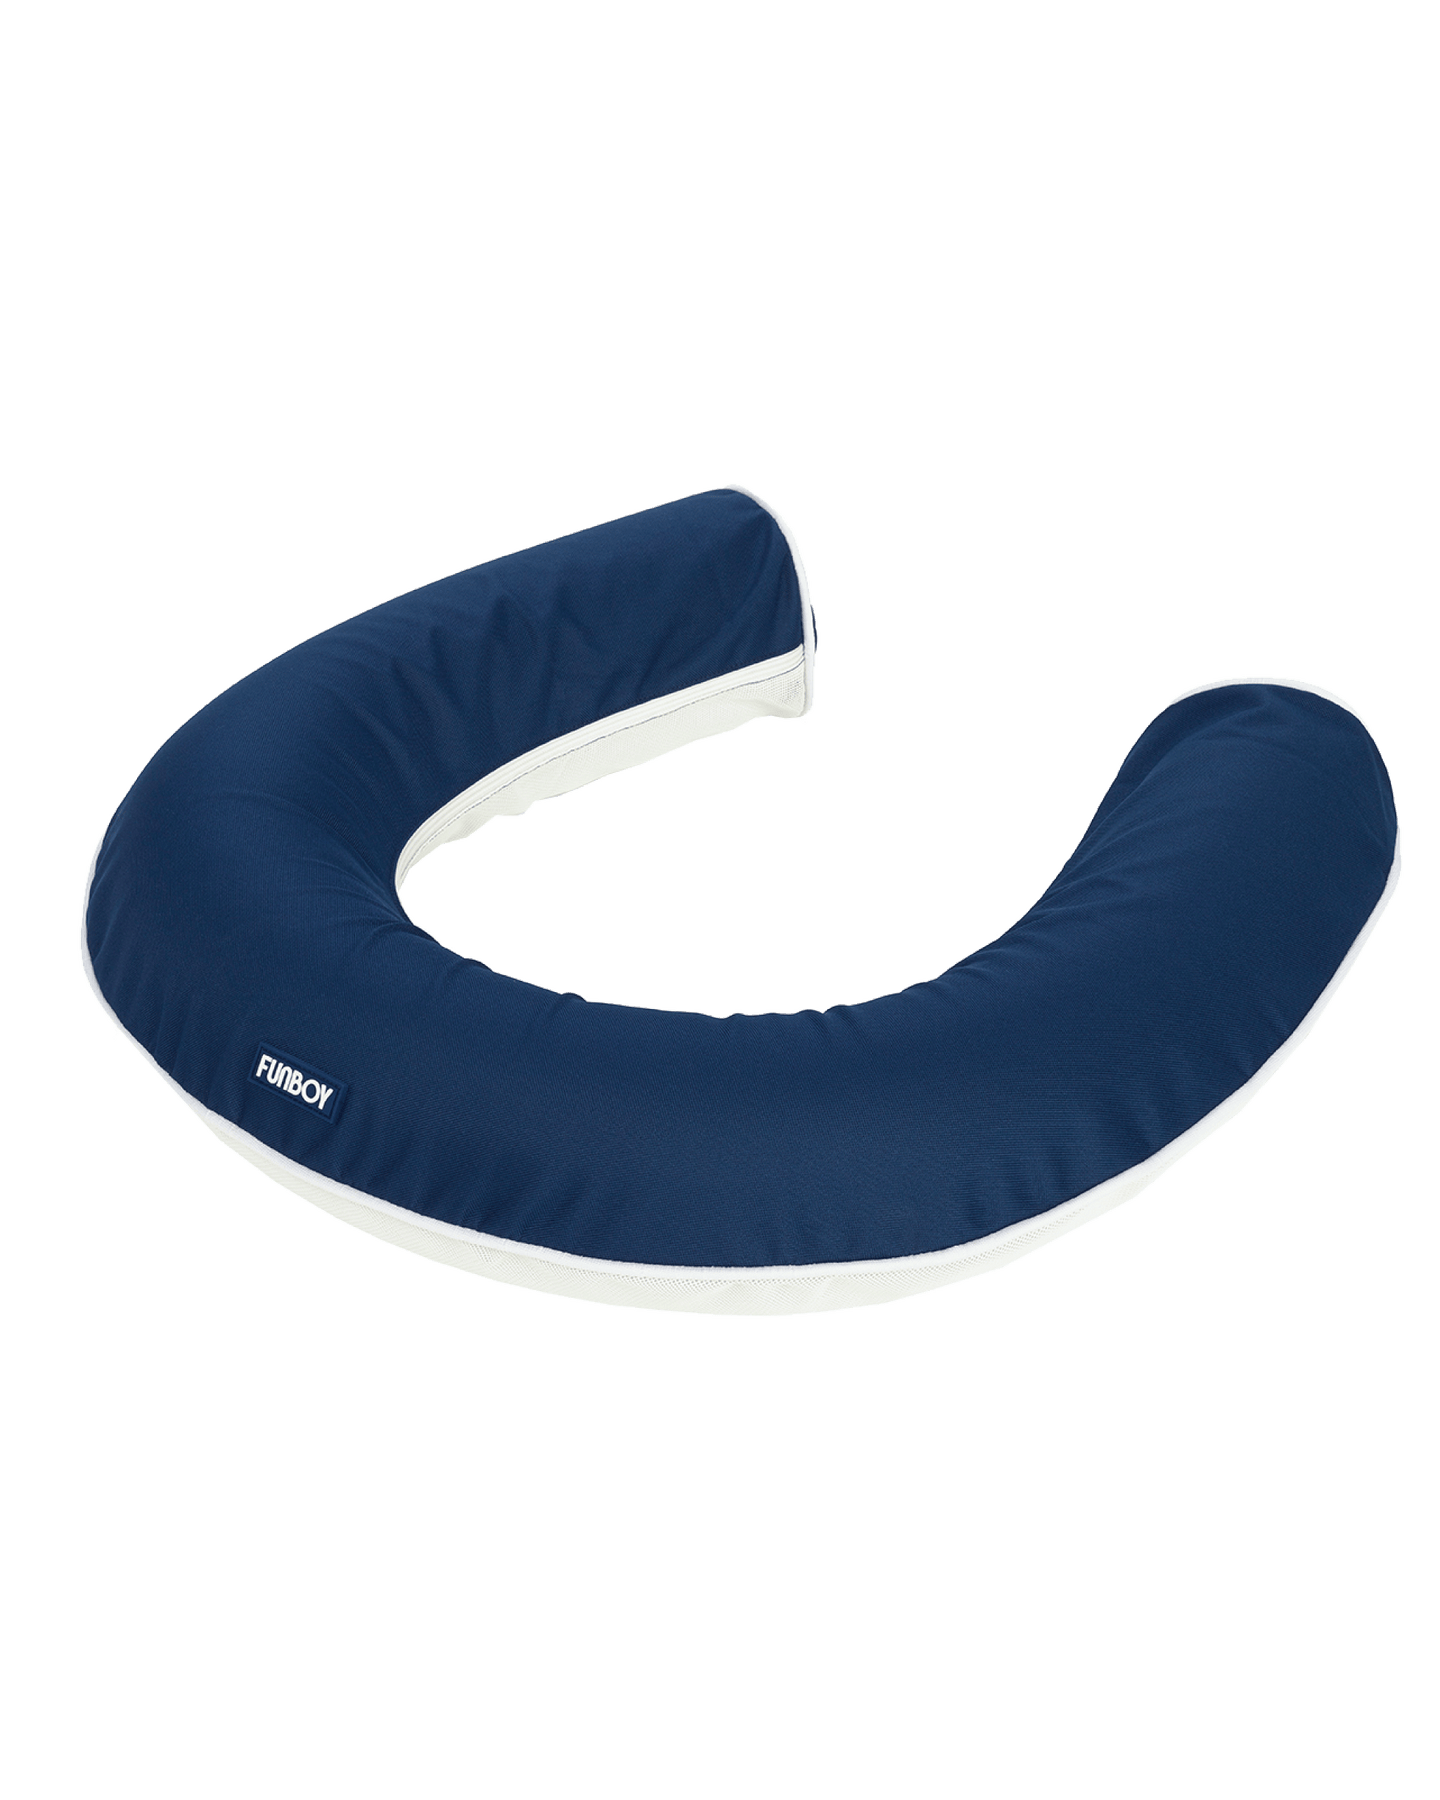 Navy Fabric Noodle Float